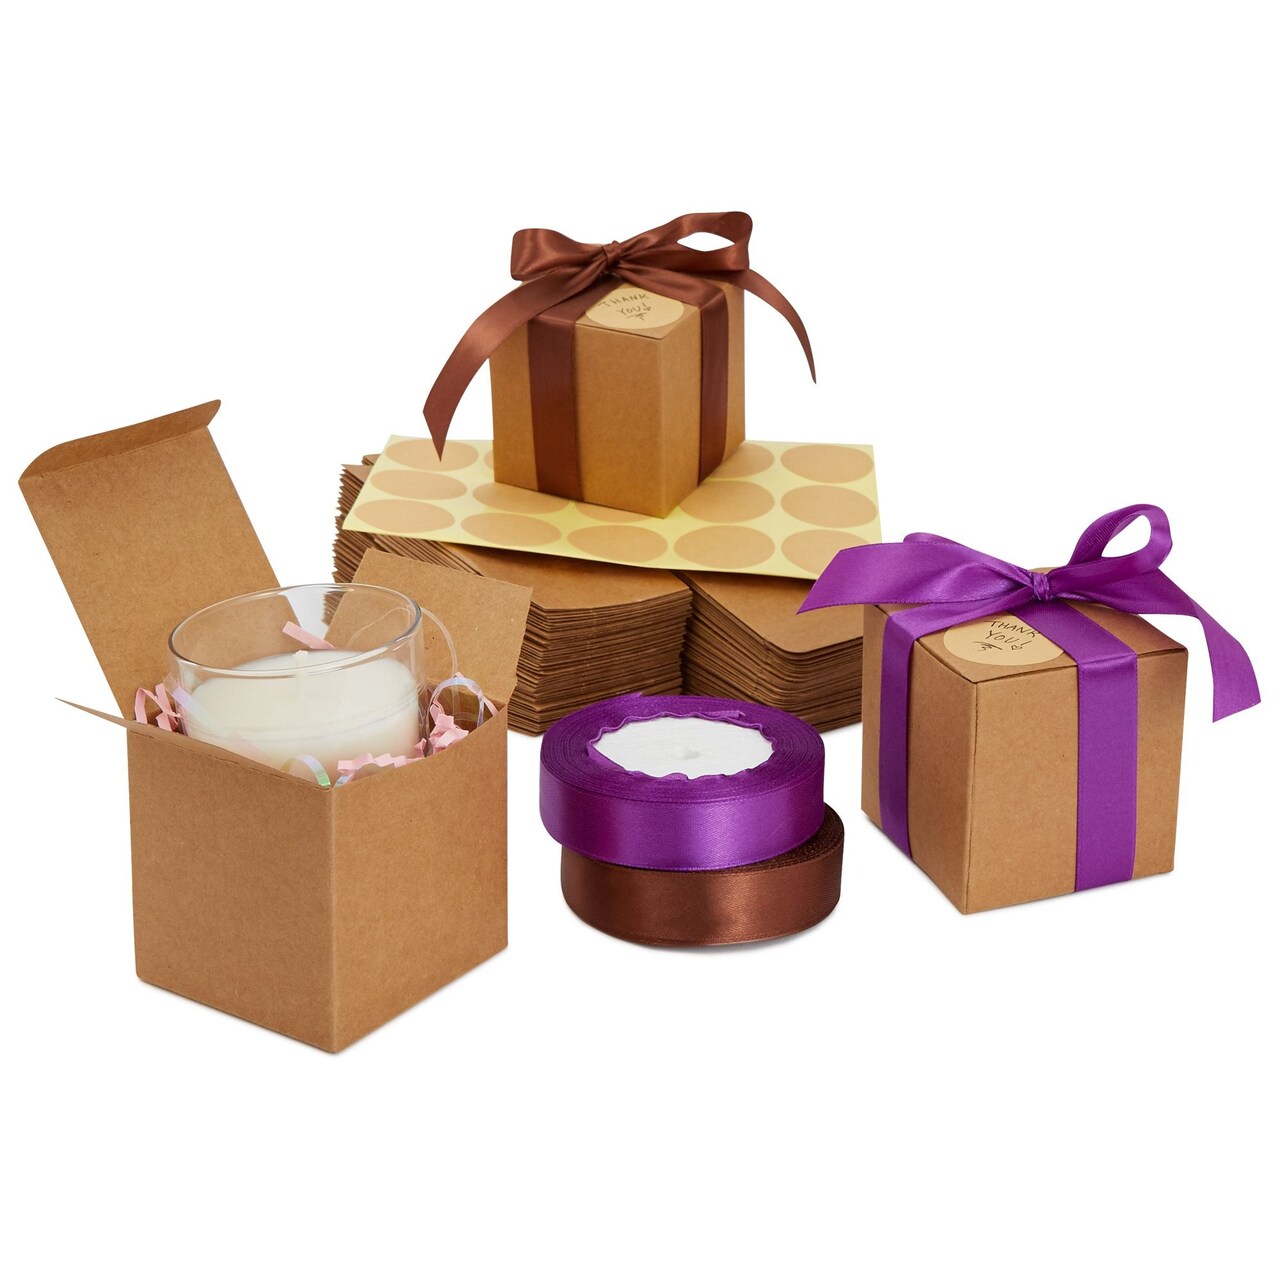 50-Pack Brown Kraft Paper Gift Boxes, 3x3x3-Inch Boxes for Party Favors  with 2 Rolls of 72-foot x 0.75-Inch Satin Ribbon in 2 Colors with 50 Round  Gold 1.5-Inch Stickers